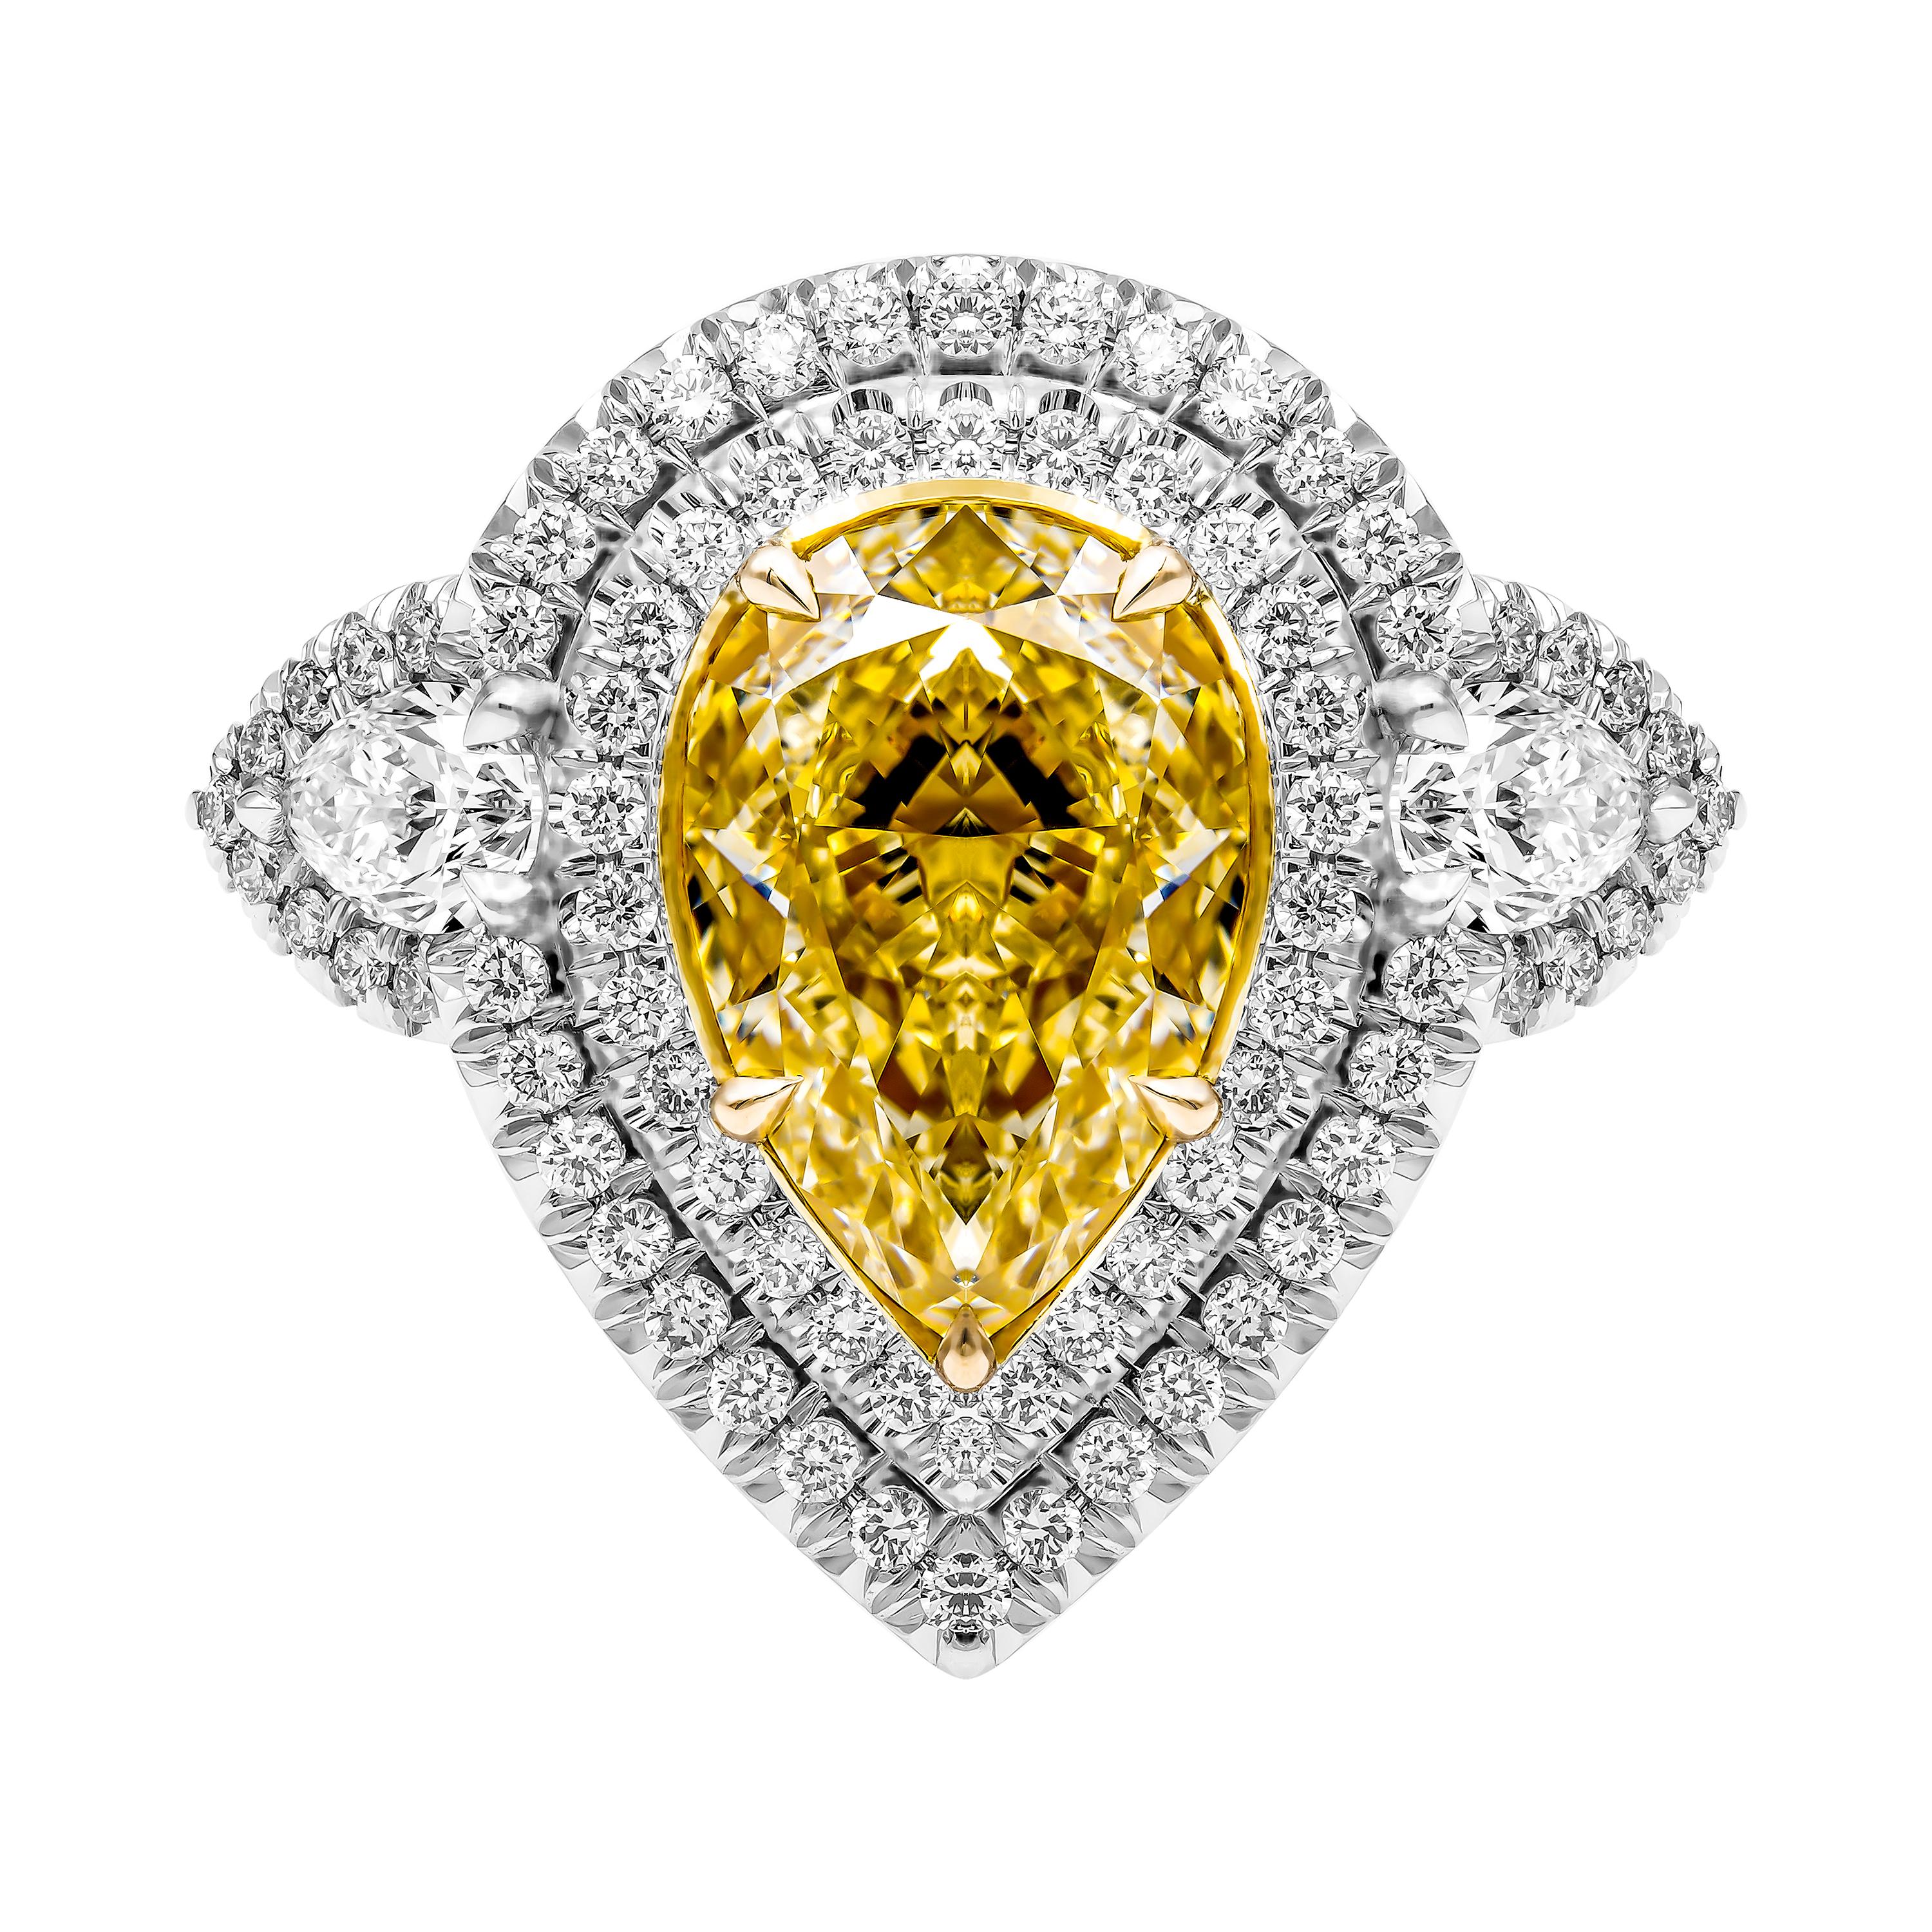 Extremely rare and one of a kind, a fancy color diamond is truly the most luxurious and exotic stone in diamond family. A great find for a collector or if you can`t resist fancy diamonds! 
Brilliant, bright and evenly distributed Yellow Extremely